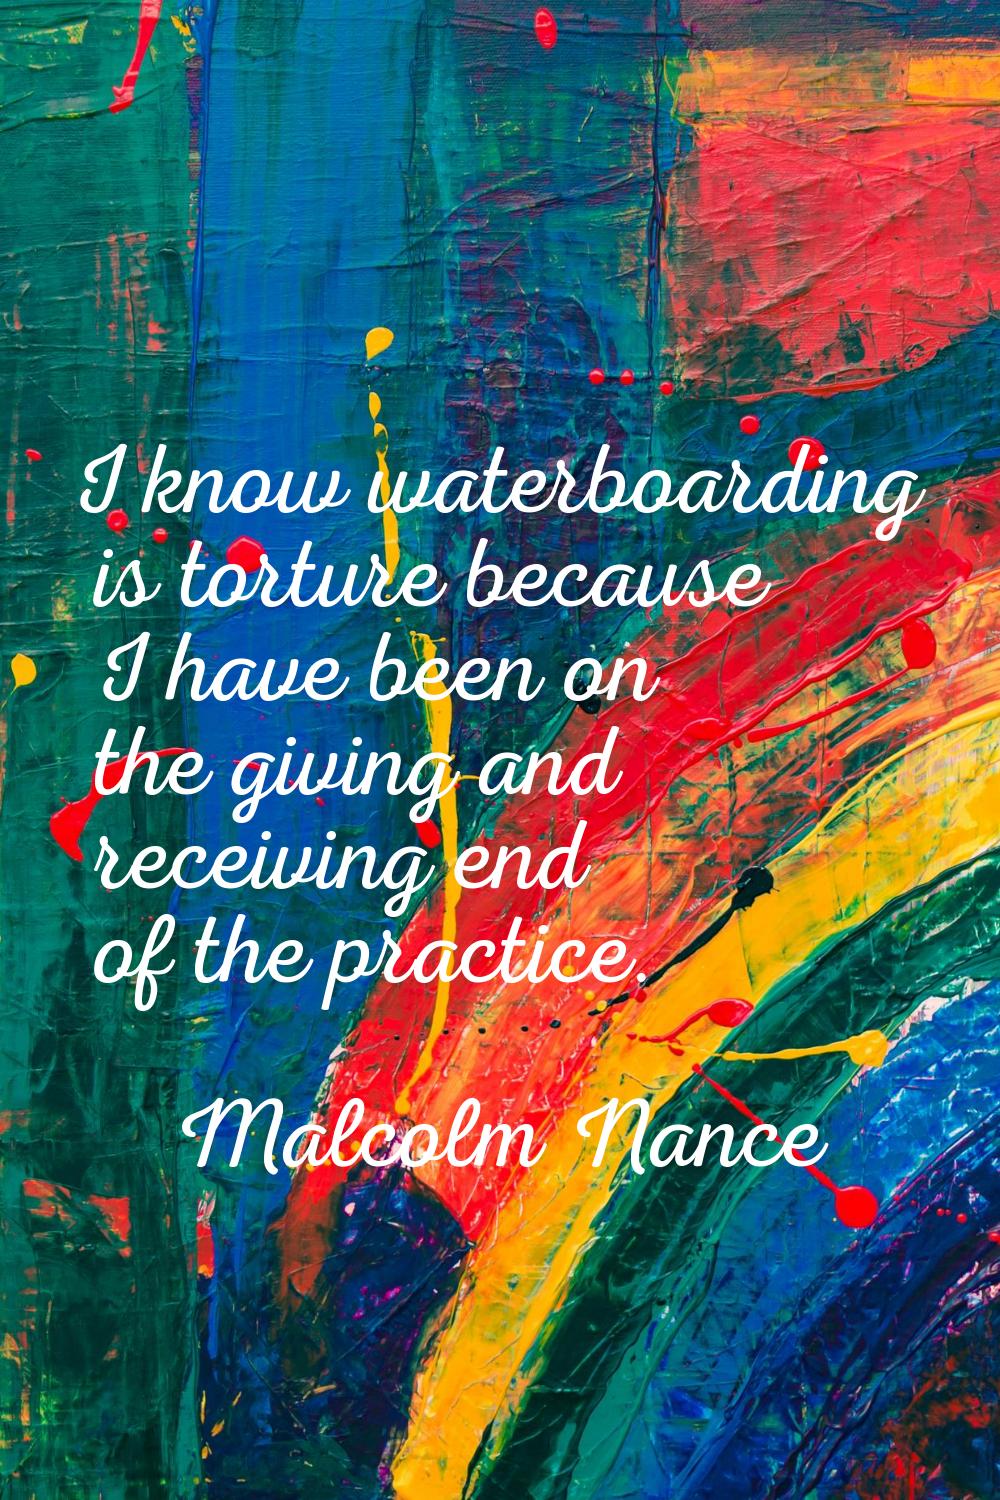 I know waterboarding is torture because I have been on the giving and receiving end of the practice